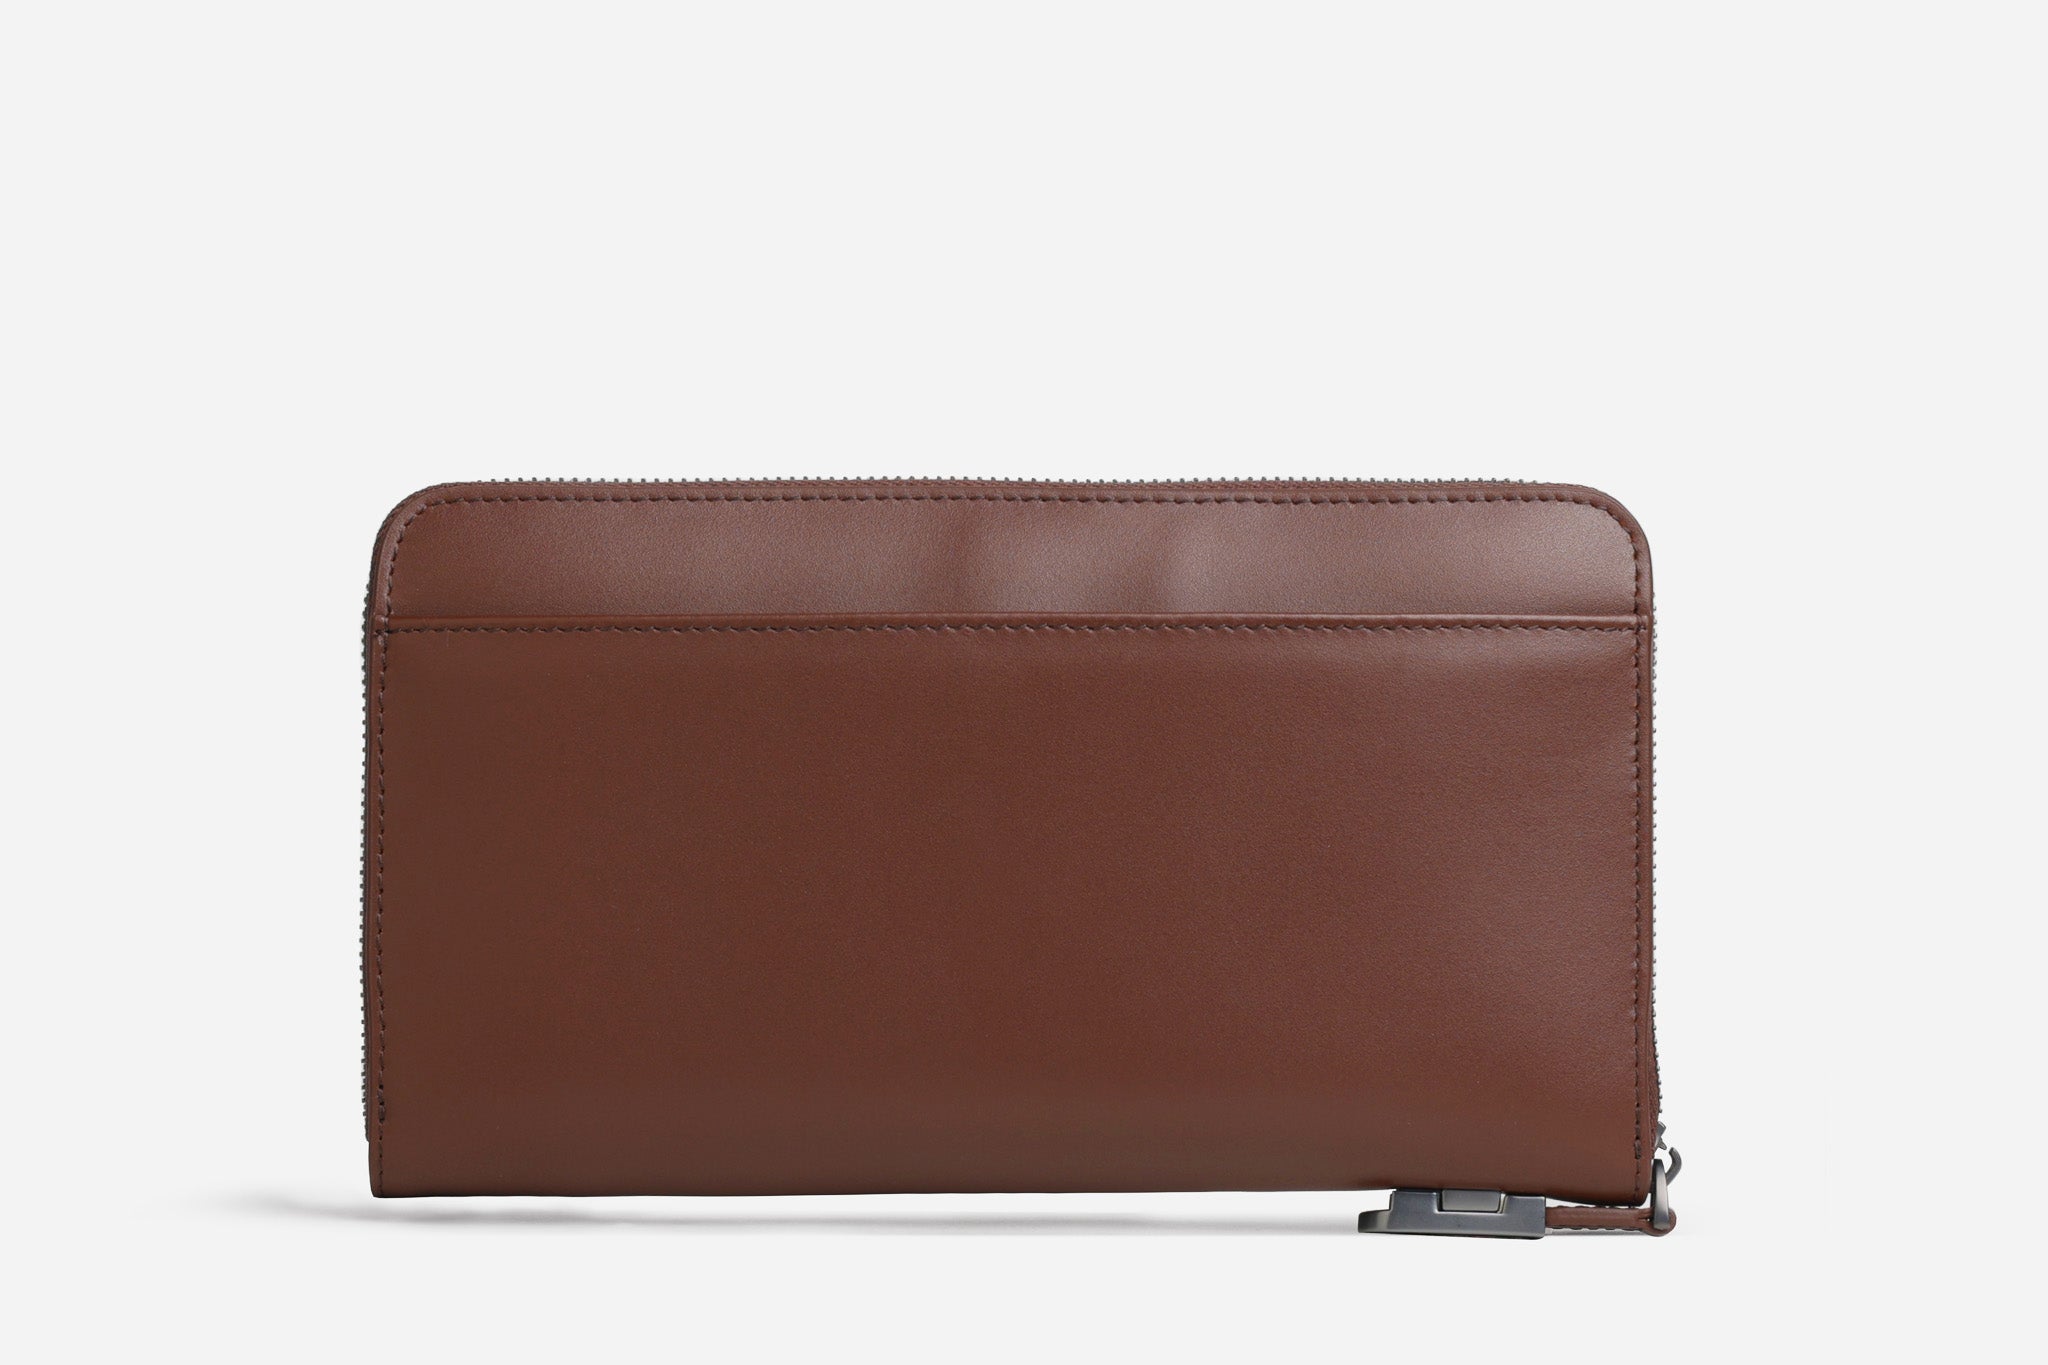 Specter Travel Wallet 2.0 - SMO Dark Brown | Outlet